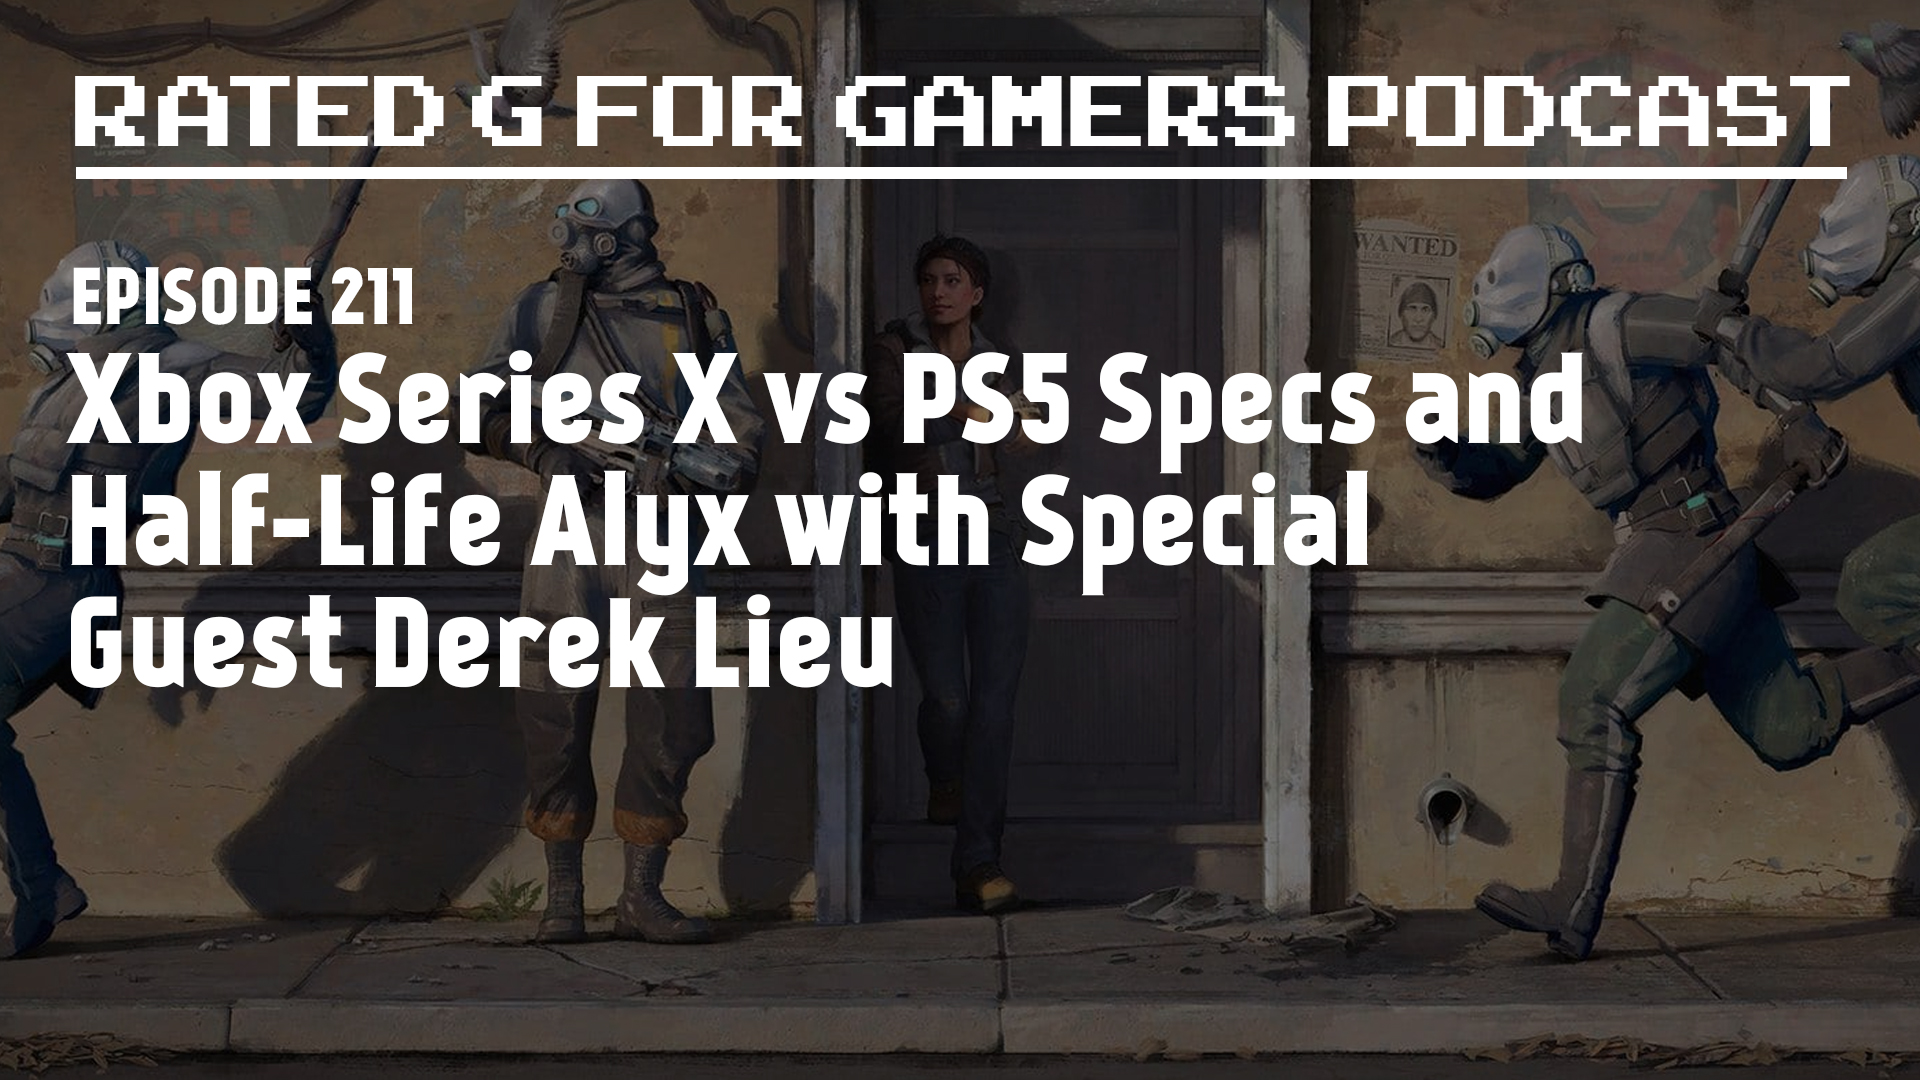 Episode 211 – Xbox Series X vs. PS5 Specs and Half-Life Alyx with Special  Guest Derek Lieu – Rated G for Gamers